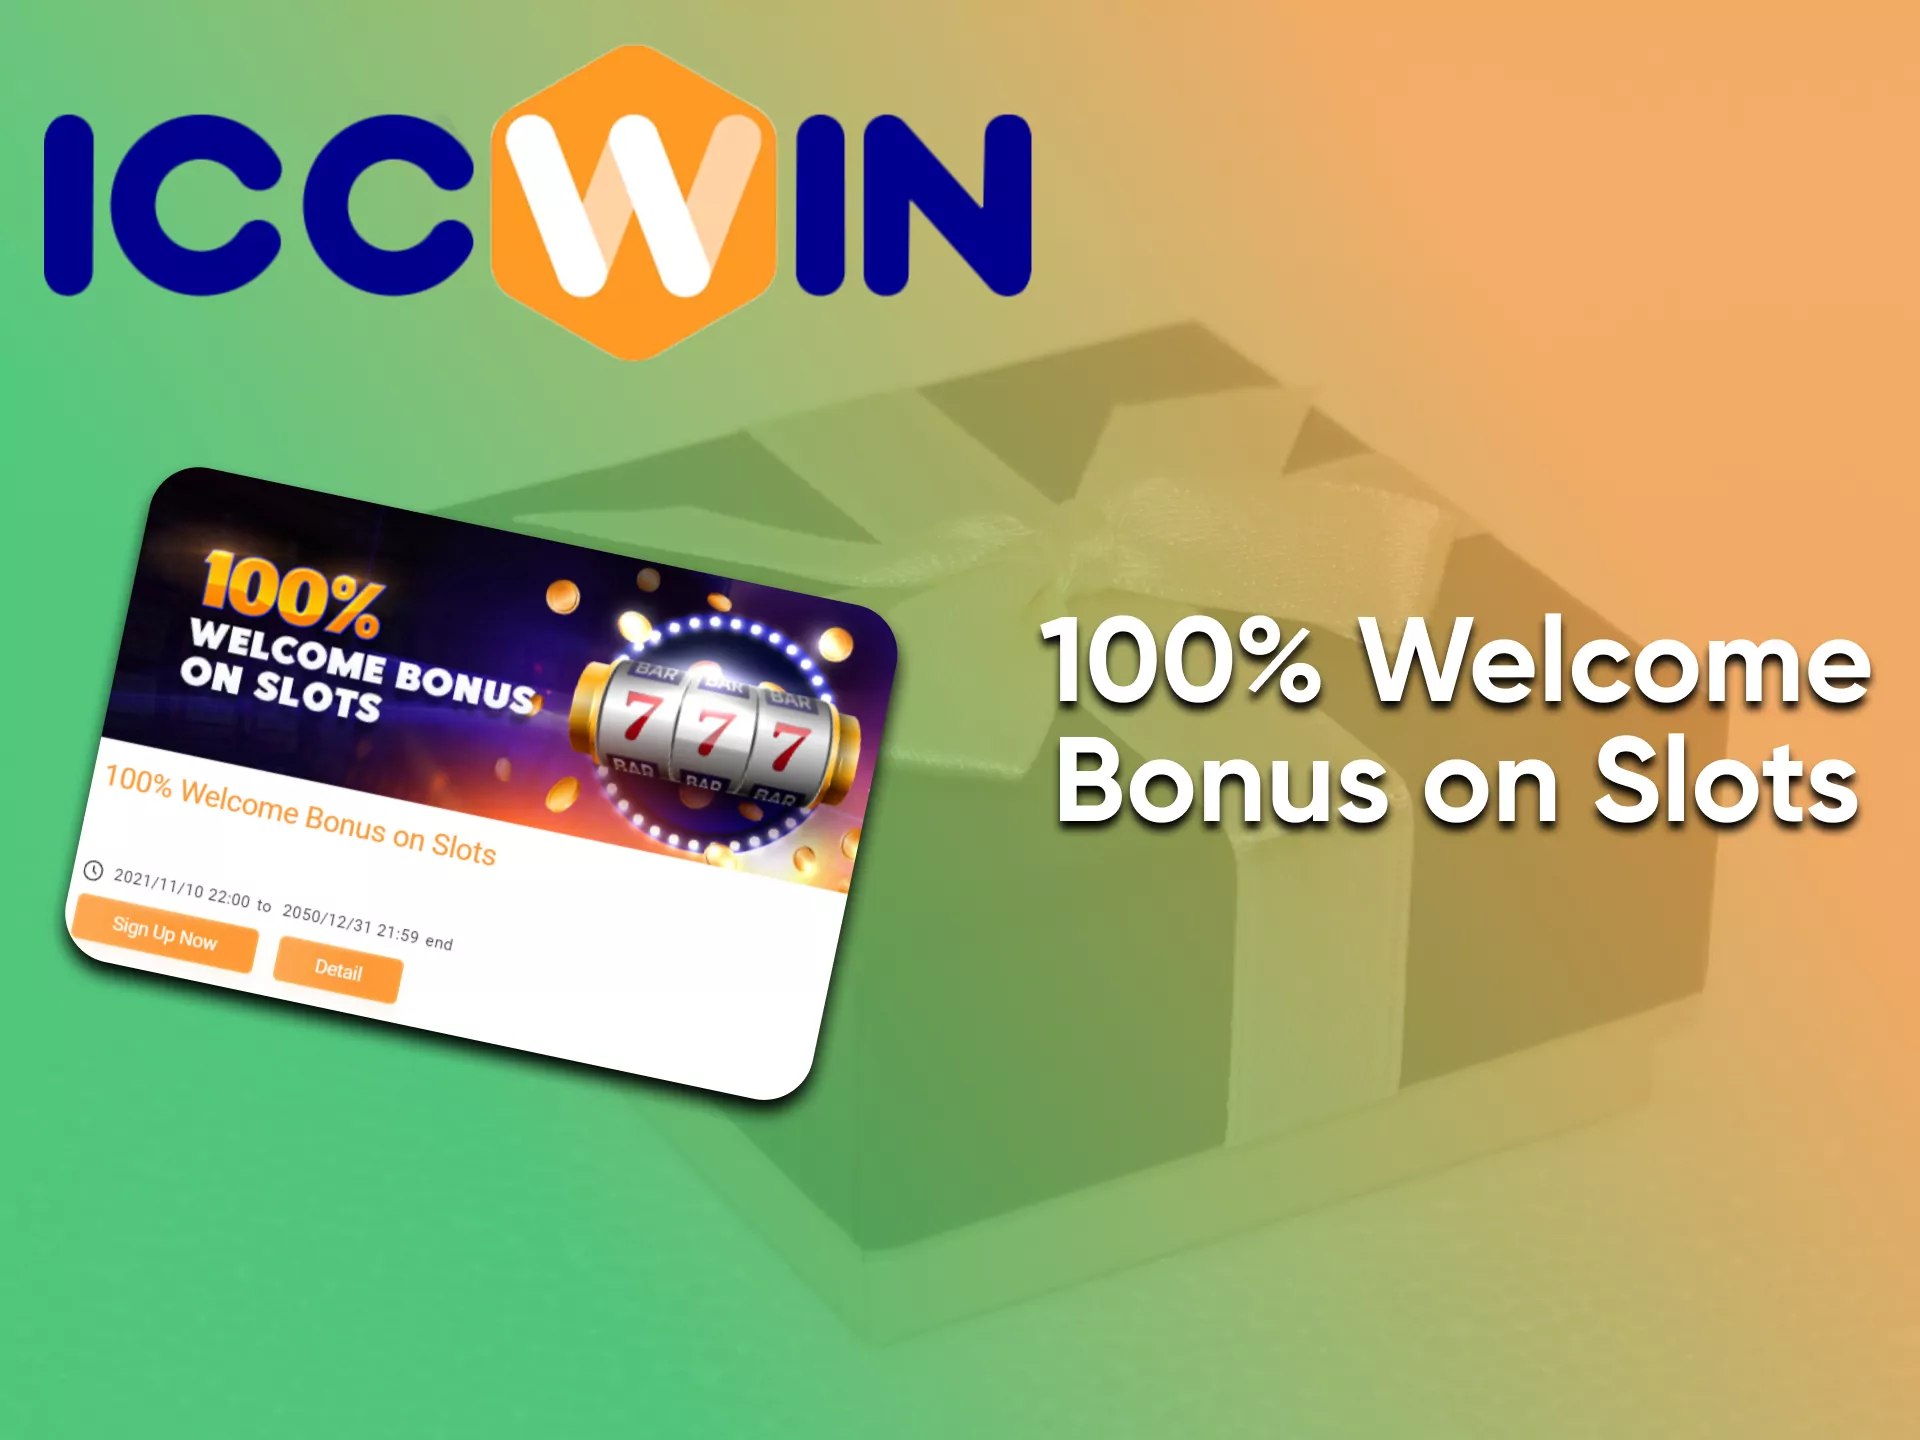 Replenish your account to receive a bonus in slots from ICCWin.